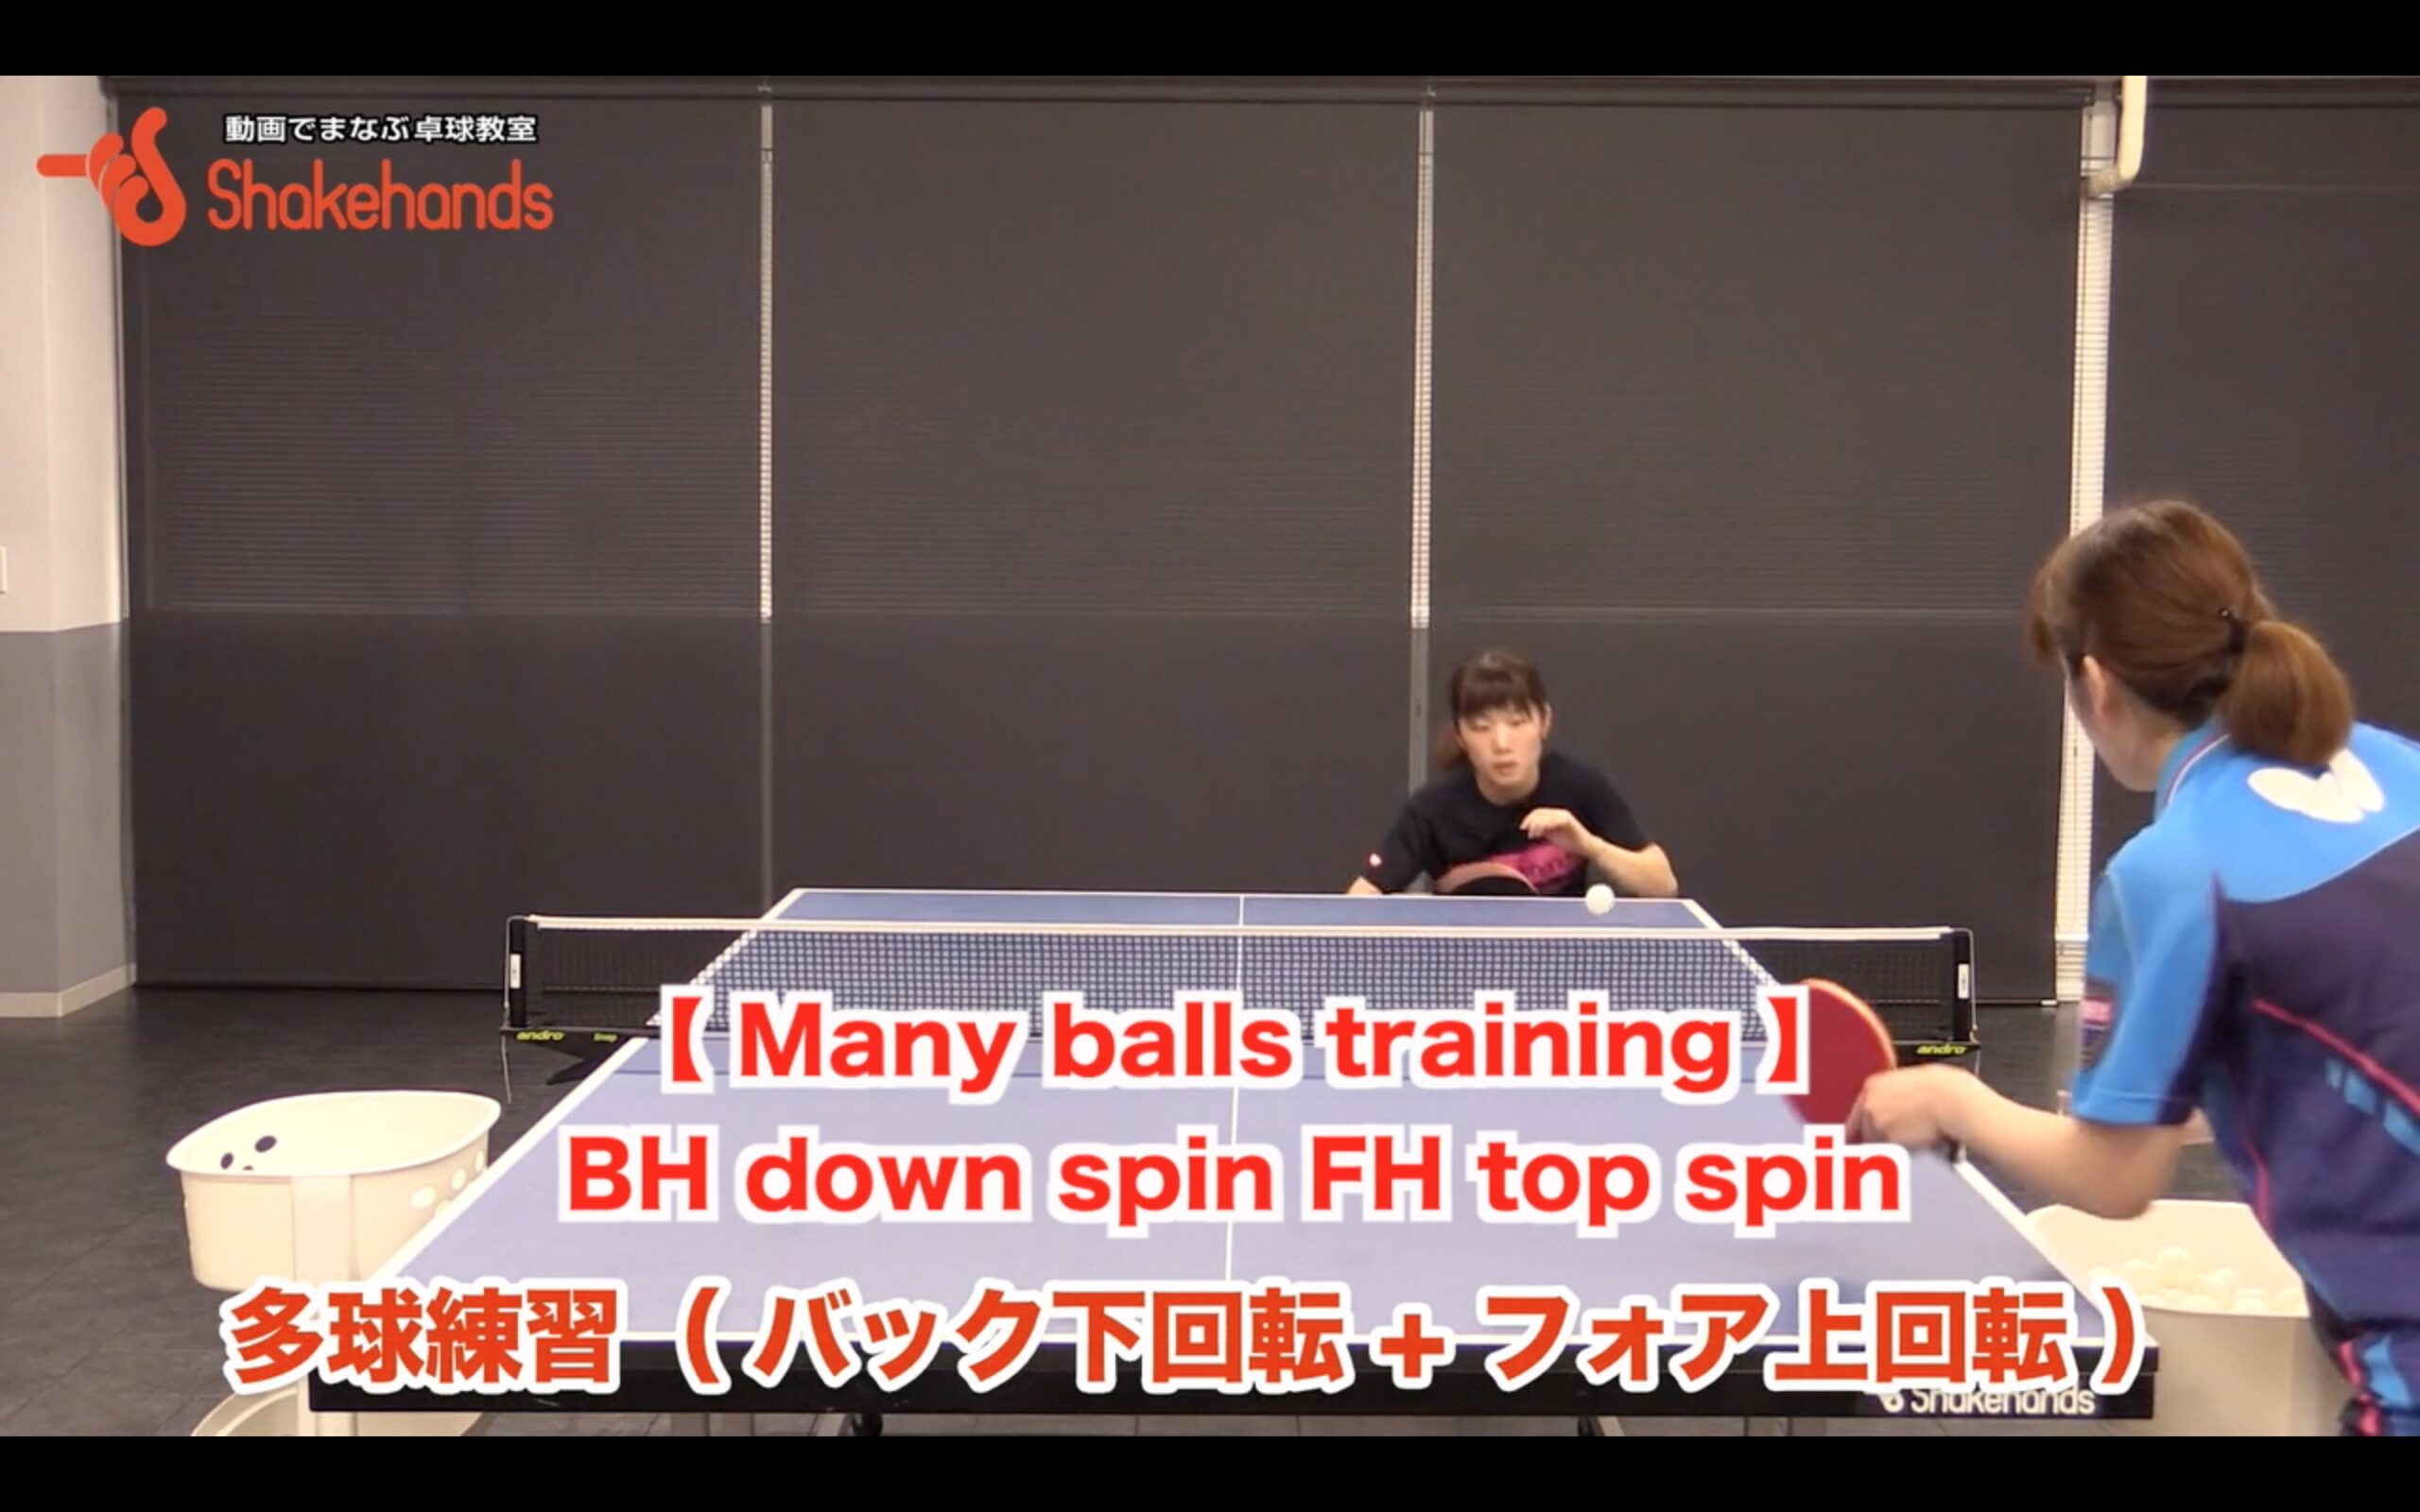 many balls training BH down spin and FH top spin